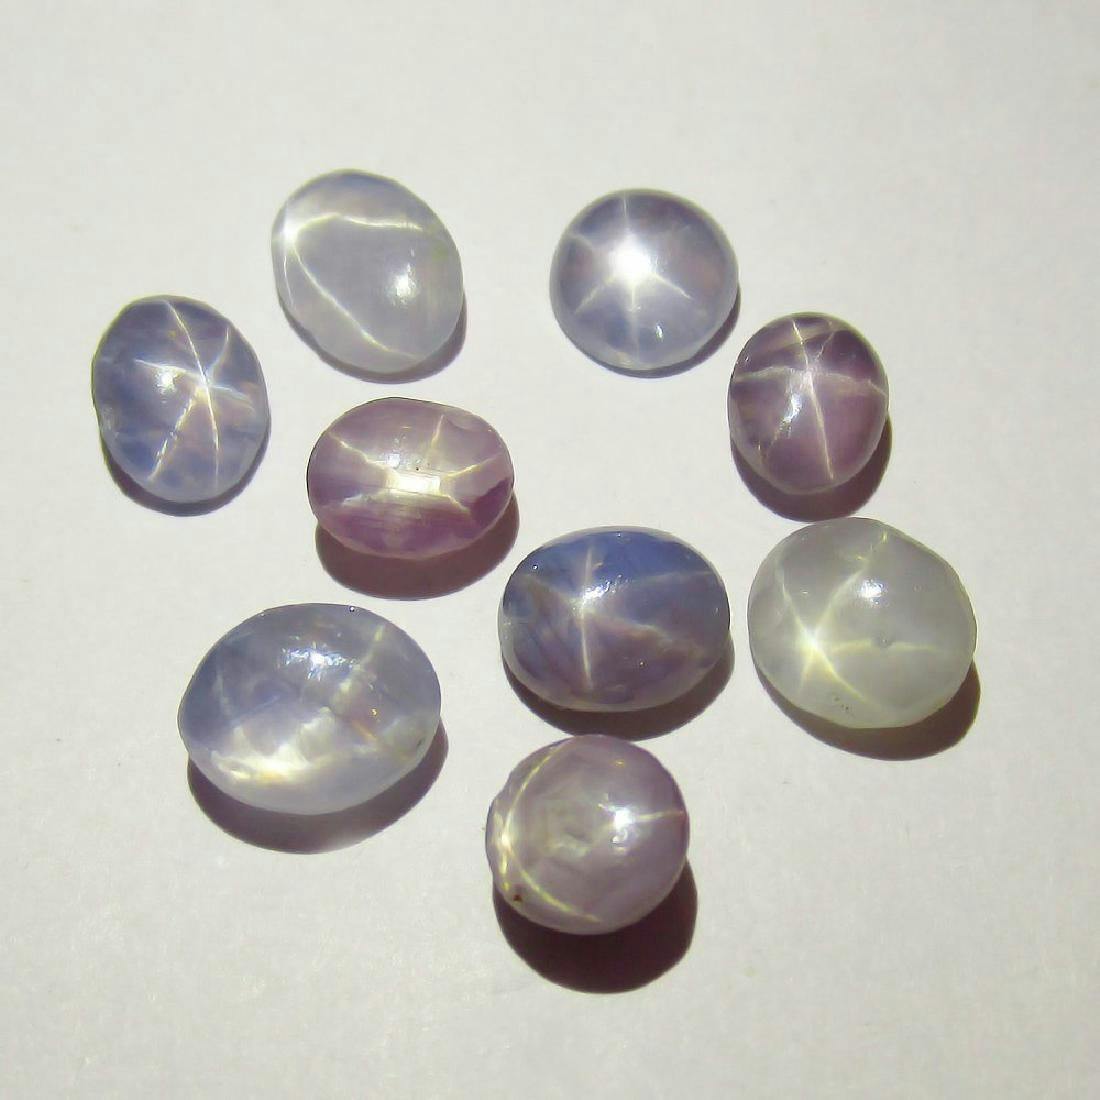 Star Sapphires and the Daddy Moon: Gemstone Stories